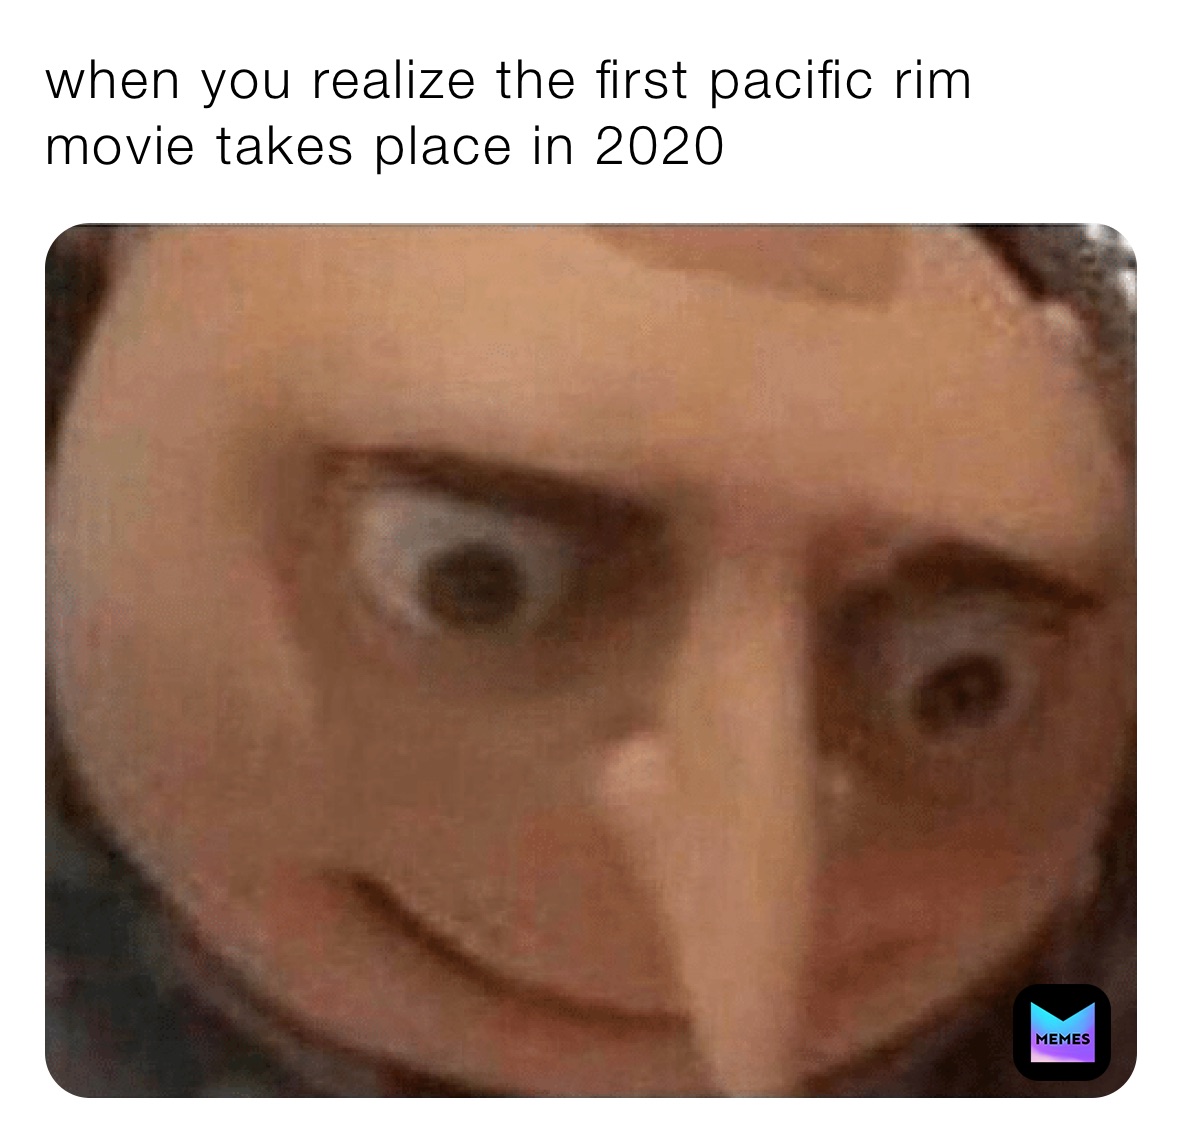 when you realize the first pacific rim movie takes place in 2020